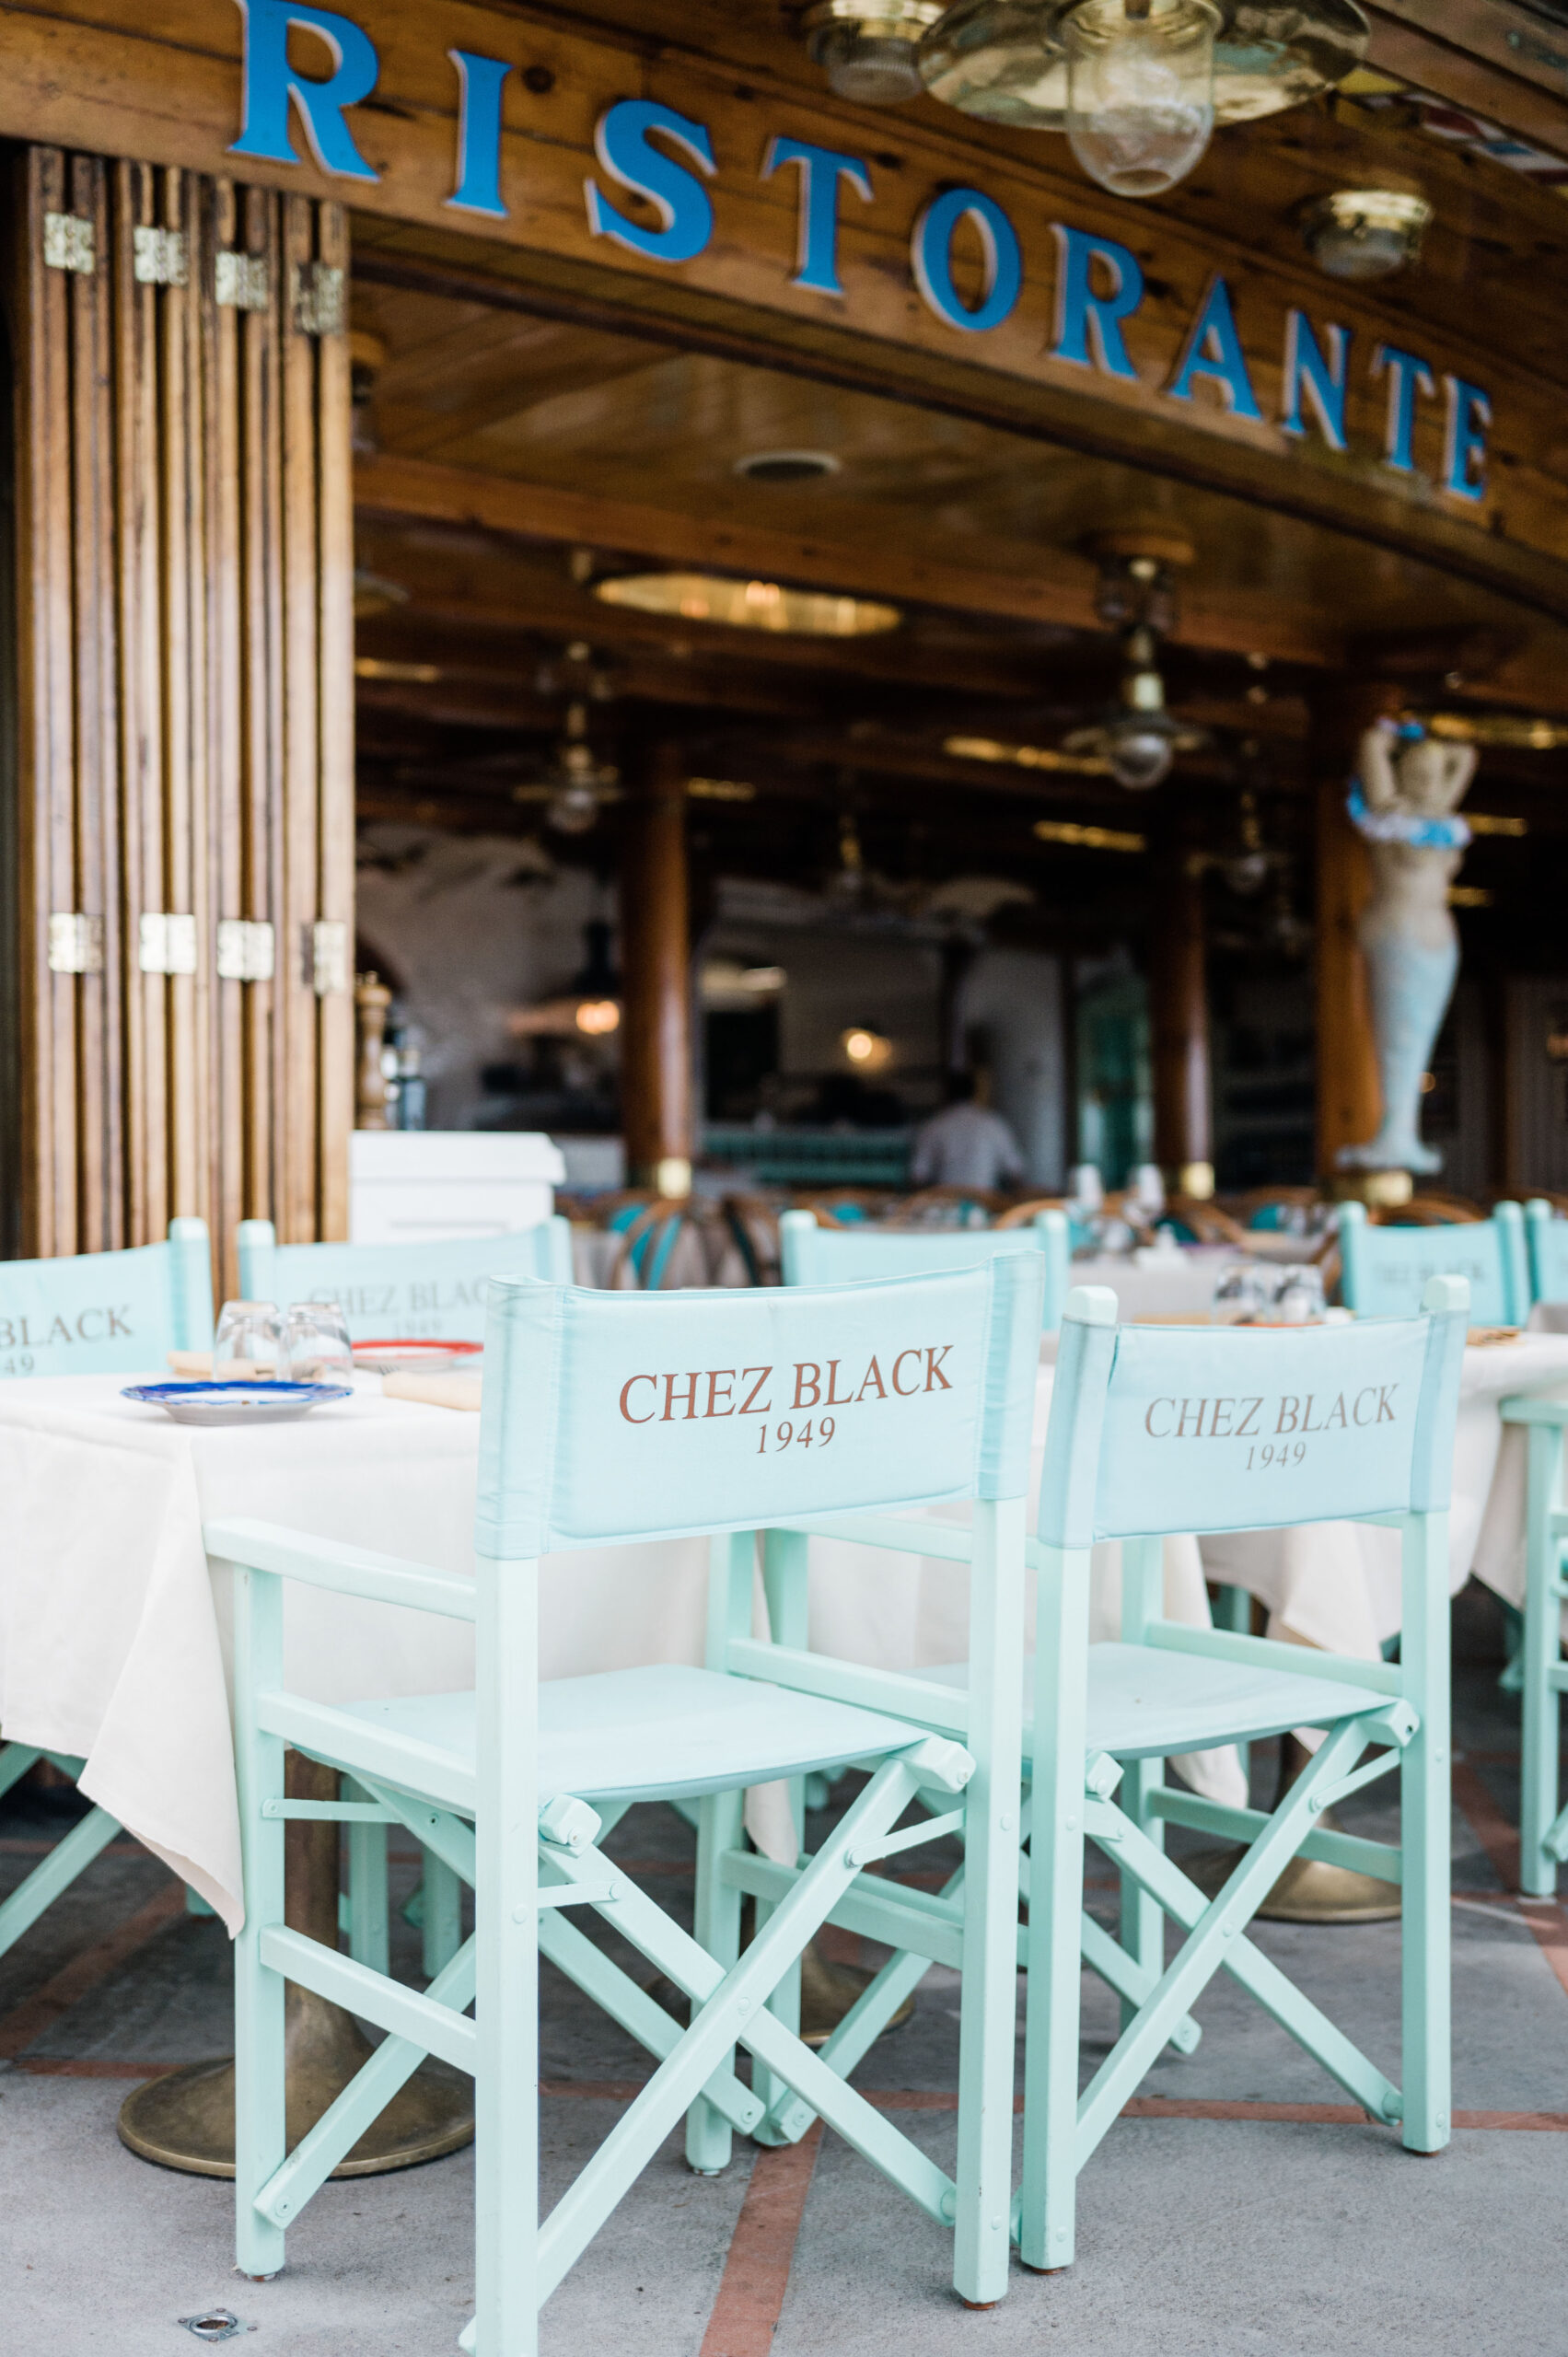 View of the chairs at Chex Black, tiffany blue with Chez Black in gold letters